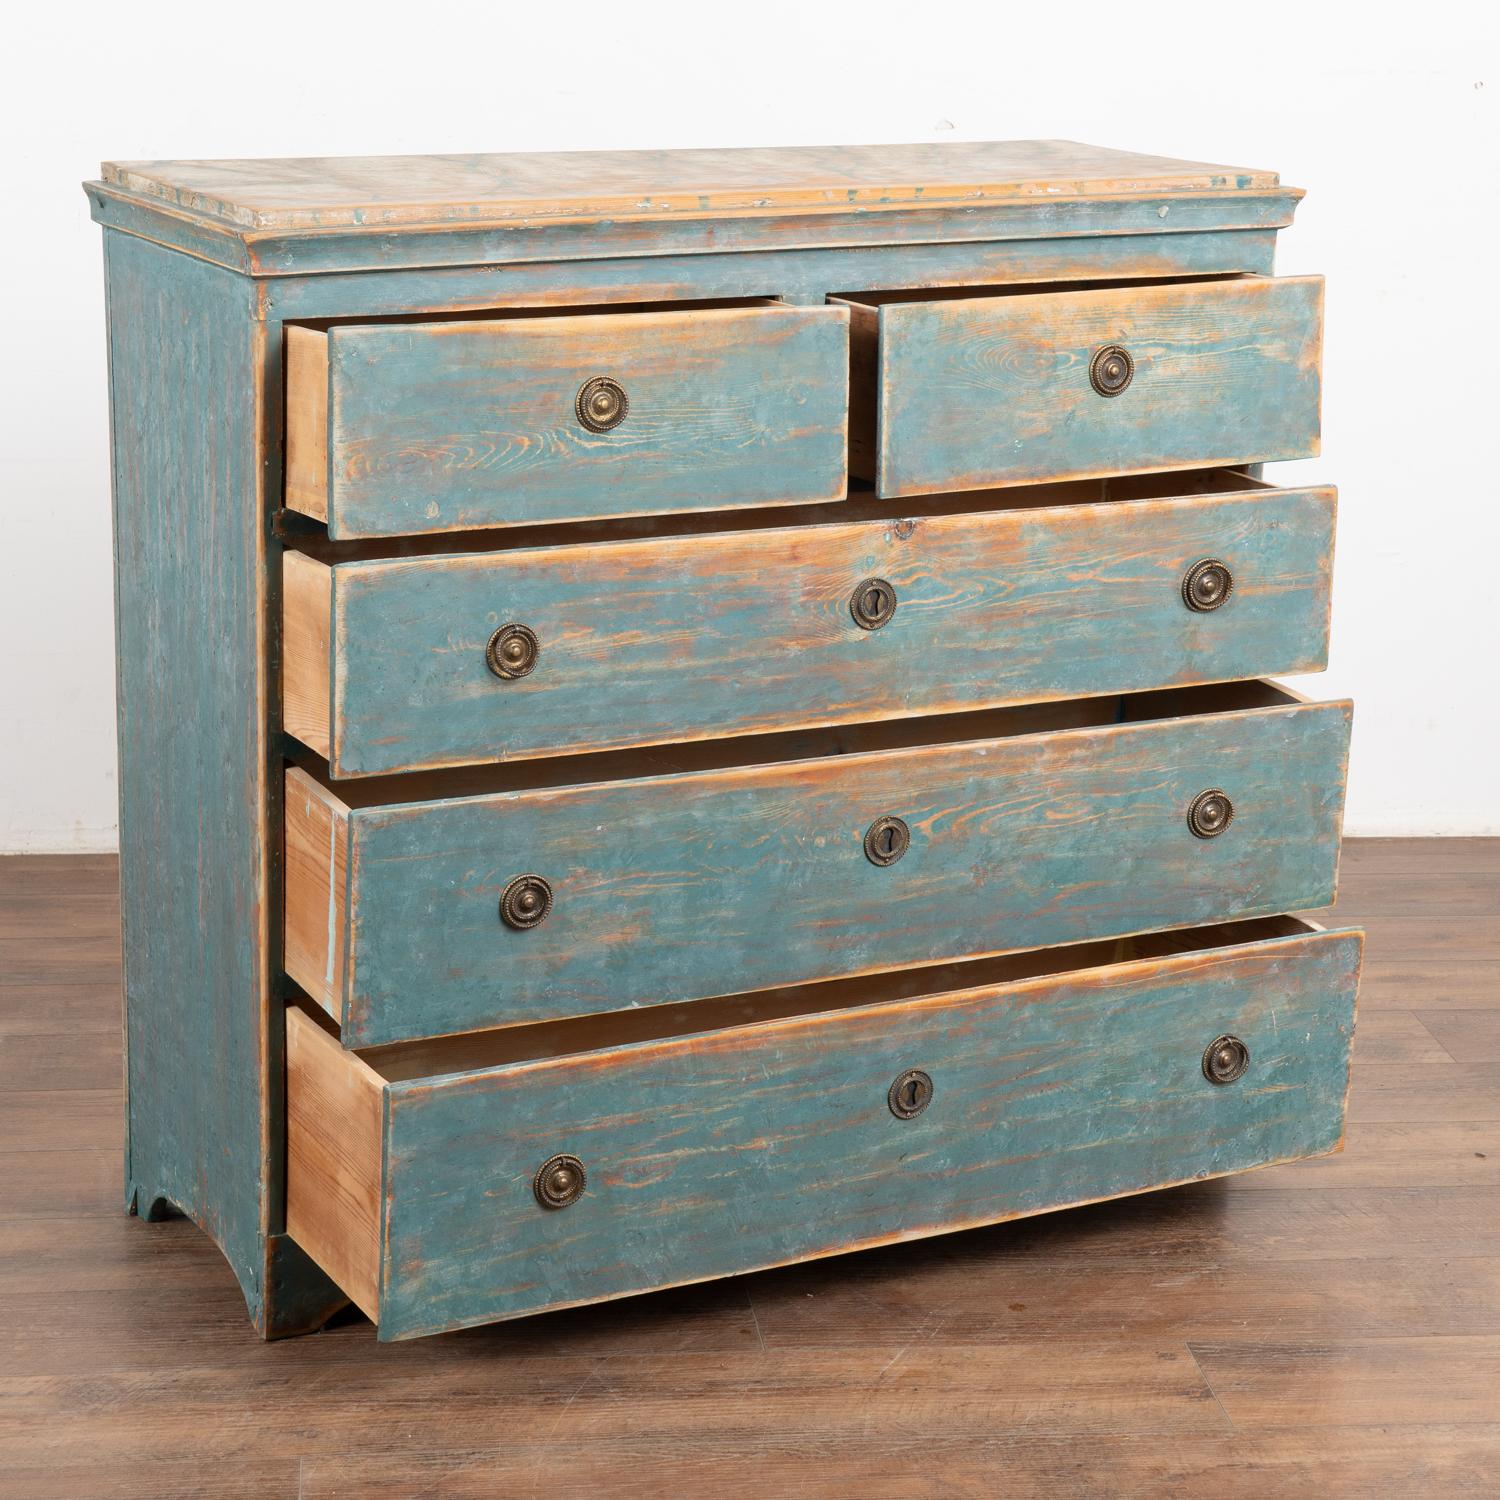 Country Original Blue Painted Swedish Pine Chest of drawers, circa 1800-20